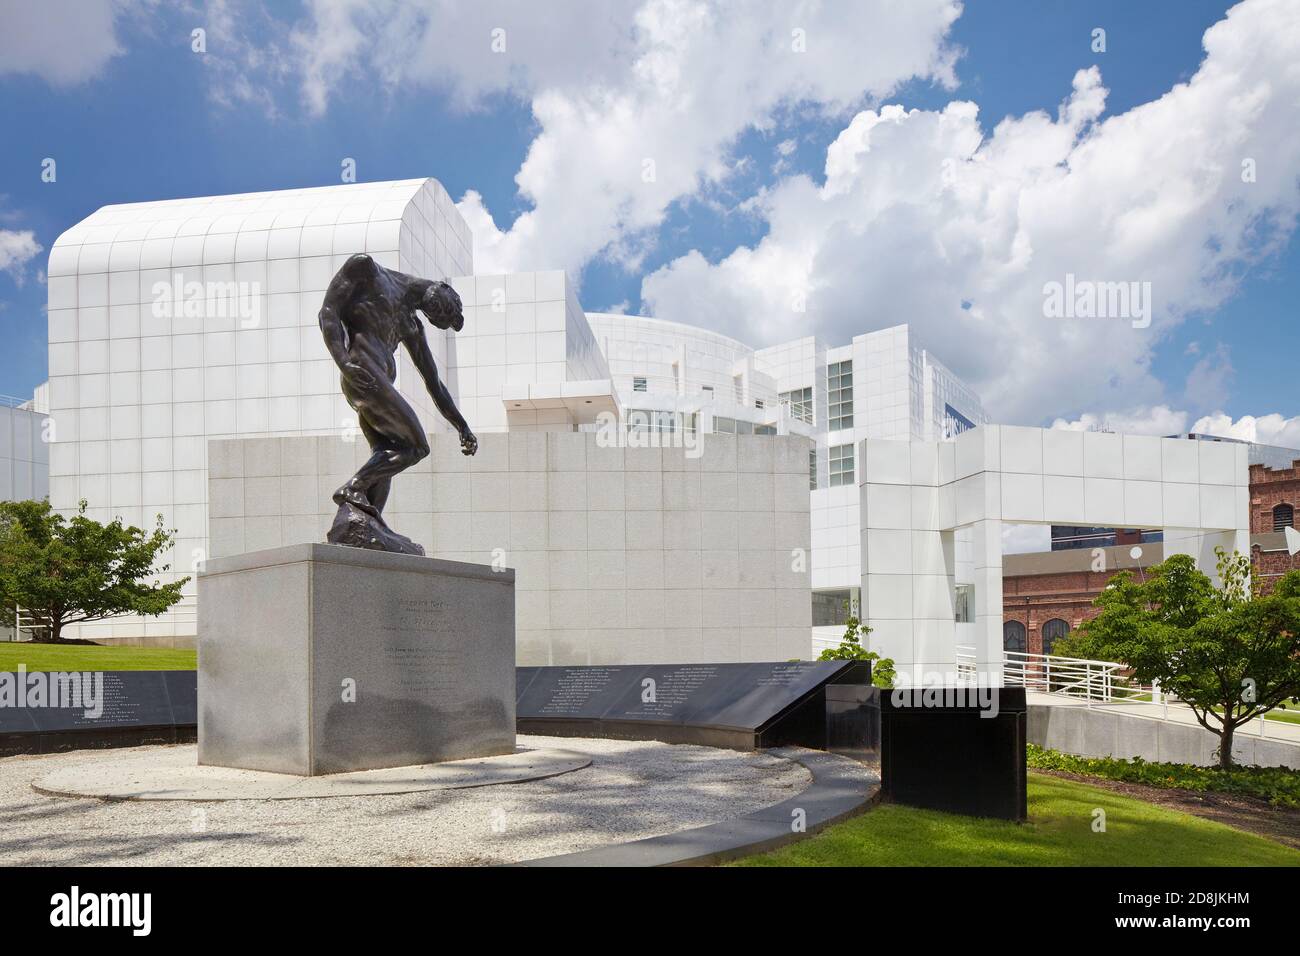 August Rodin's sculpture, The Shade, on display outside the High Museum of Art in Atlanta. Stock Photo